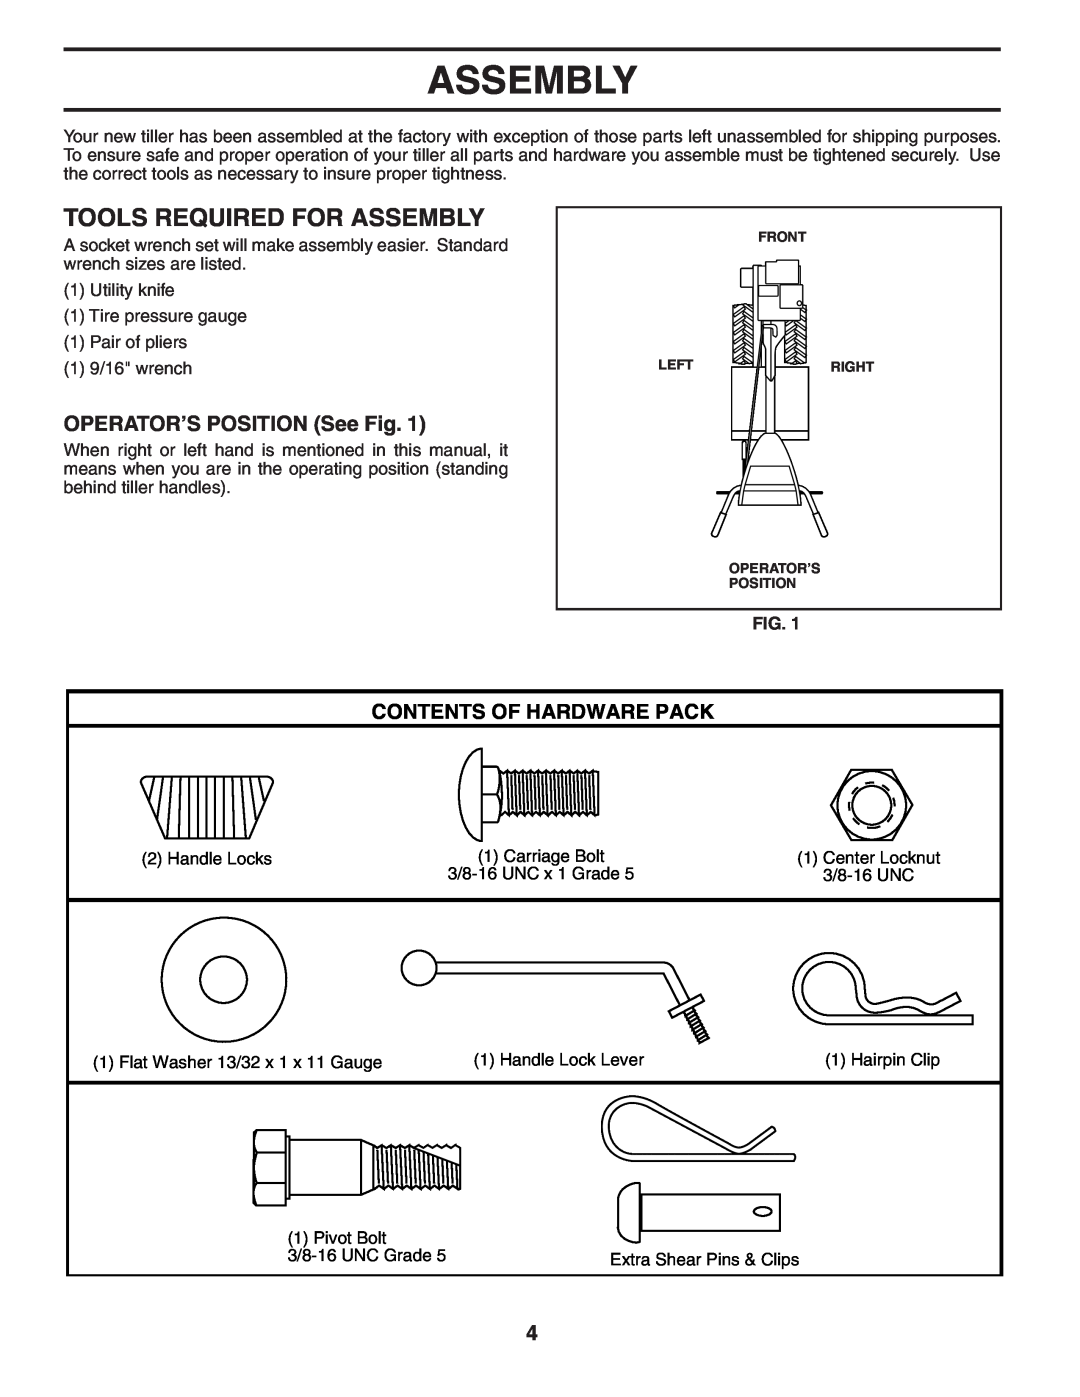 Poulan PRRT50 manual Tools Required For Assembly, OPERATOR’S POSITION See Fig, Contents Of Hardware Pack 